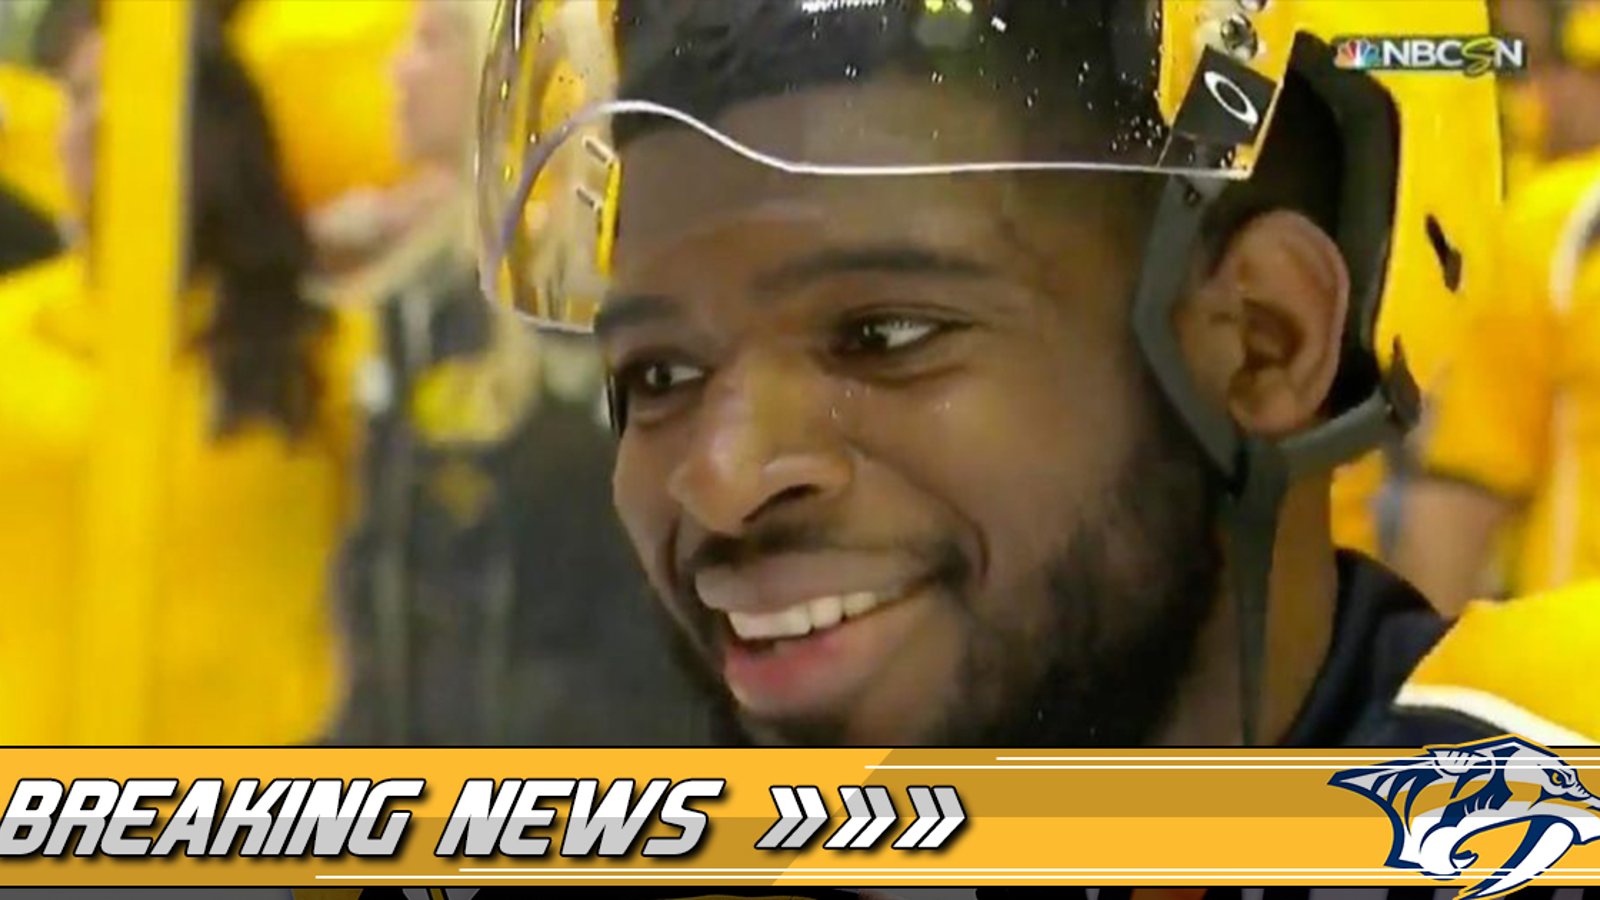 Subban fires back at Crosby immediately following game 3